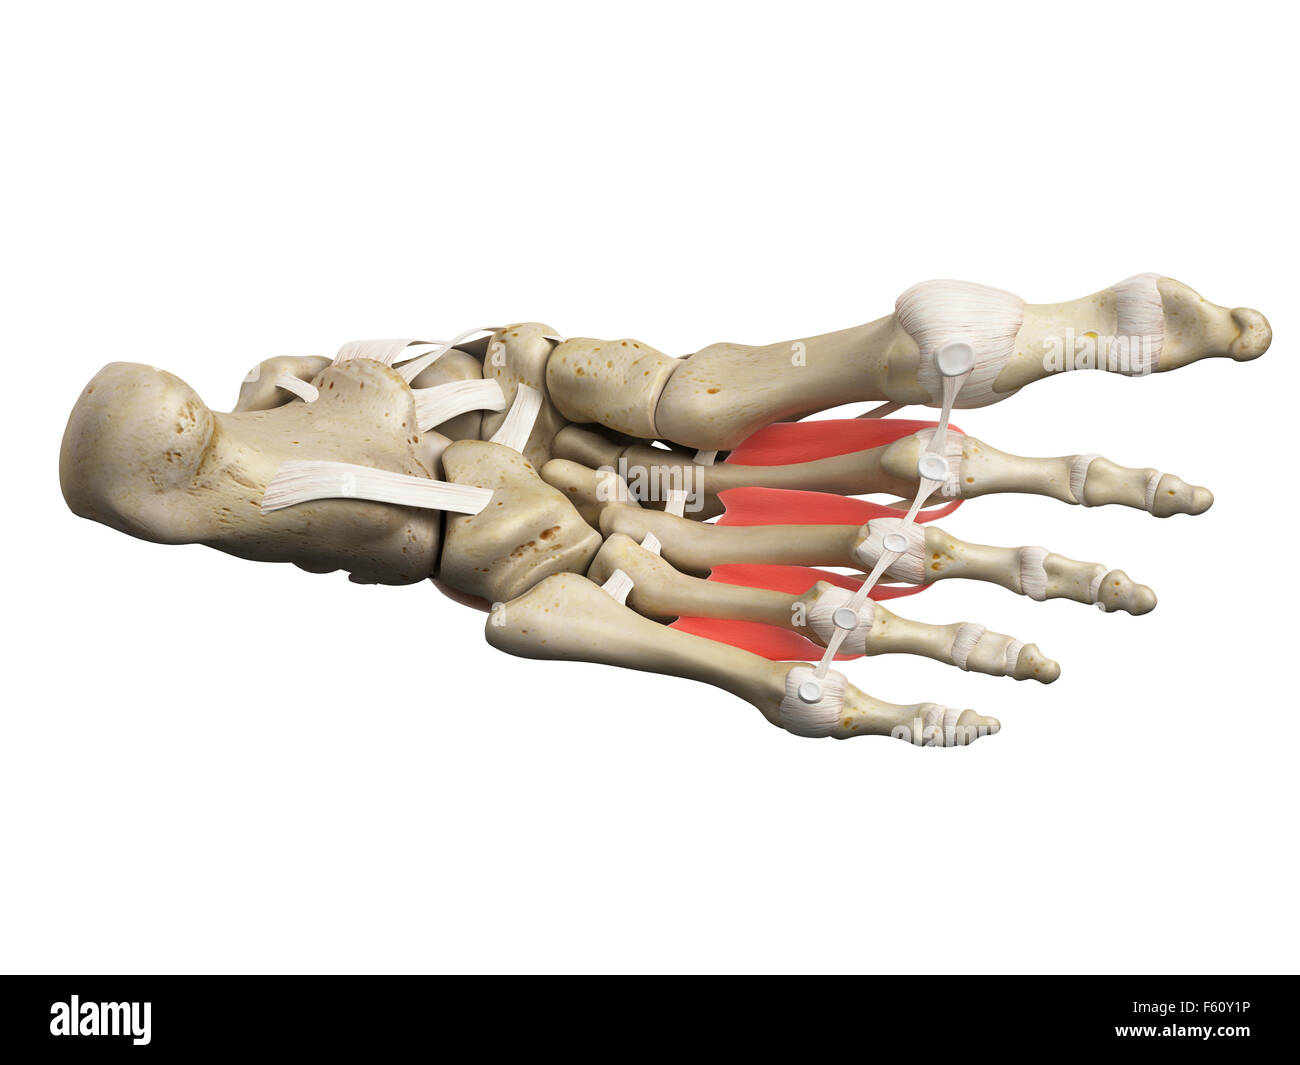 medically accurate illustration of the dorsal interosseous muscles Stock Photo